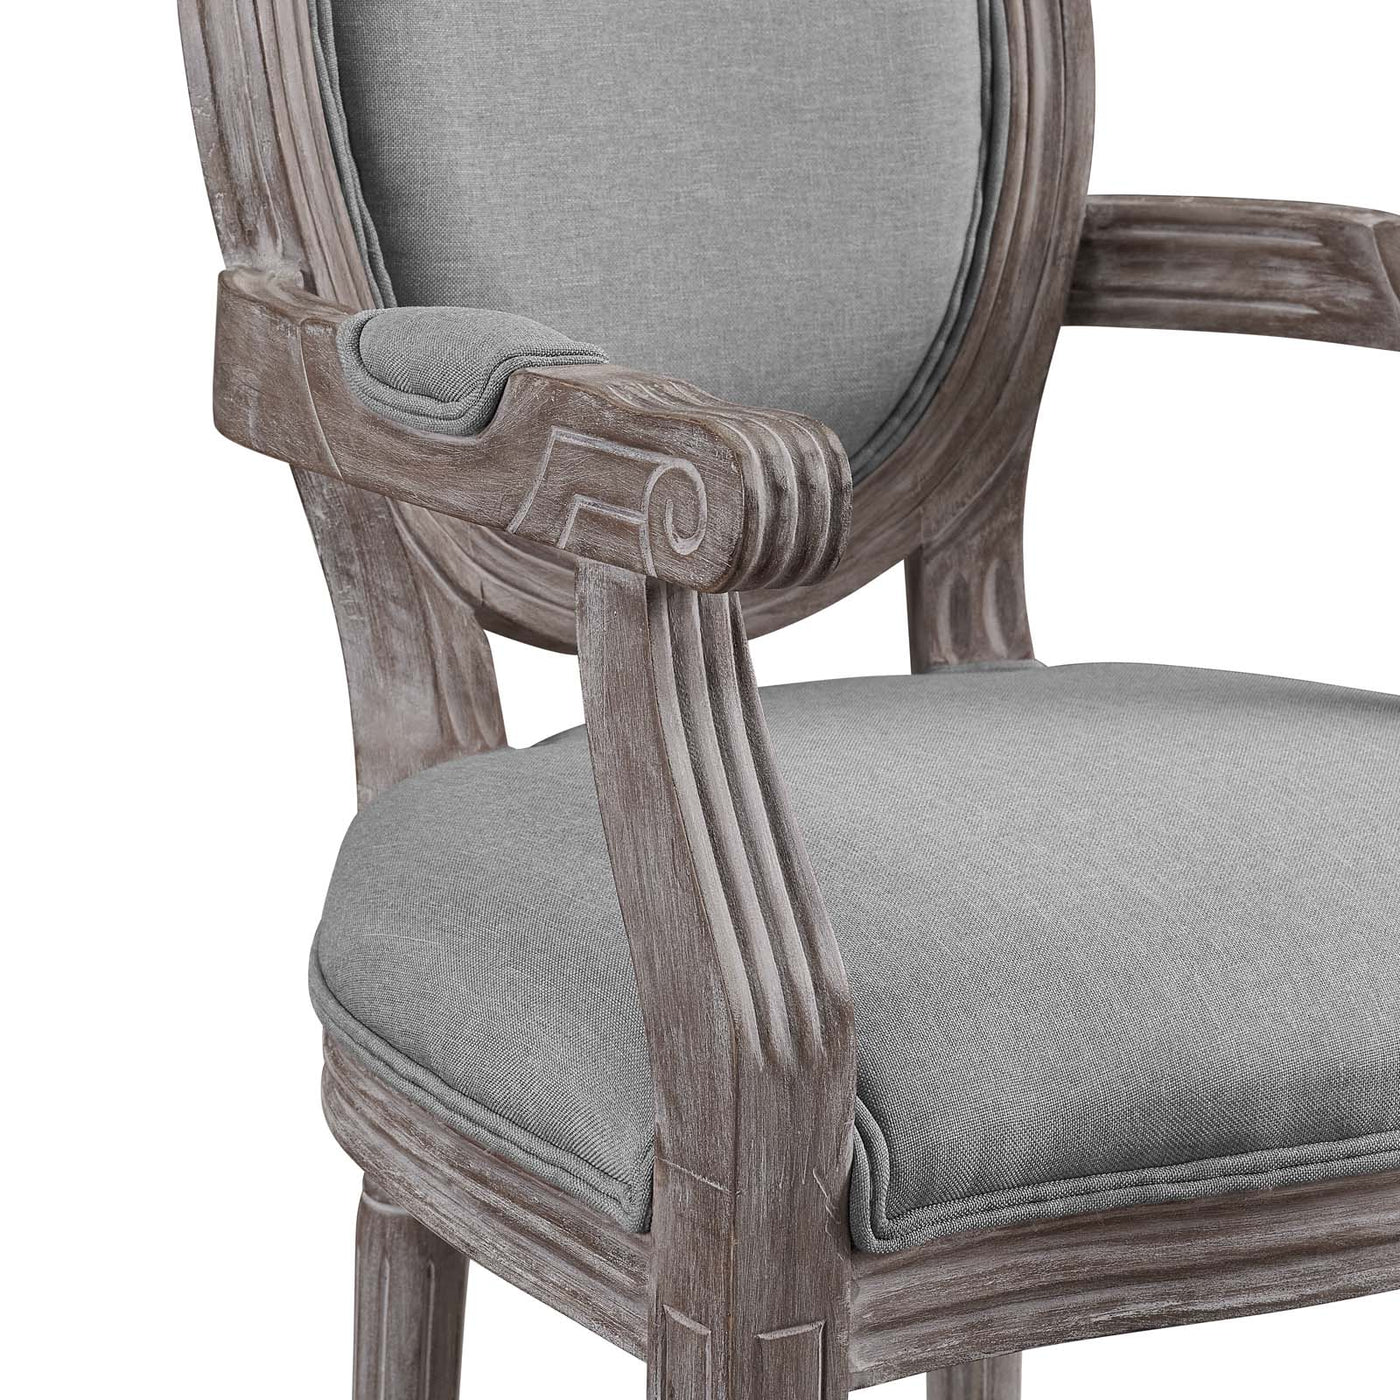 Emanate Dining Armchair Upholstered Fabric Set of 2